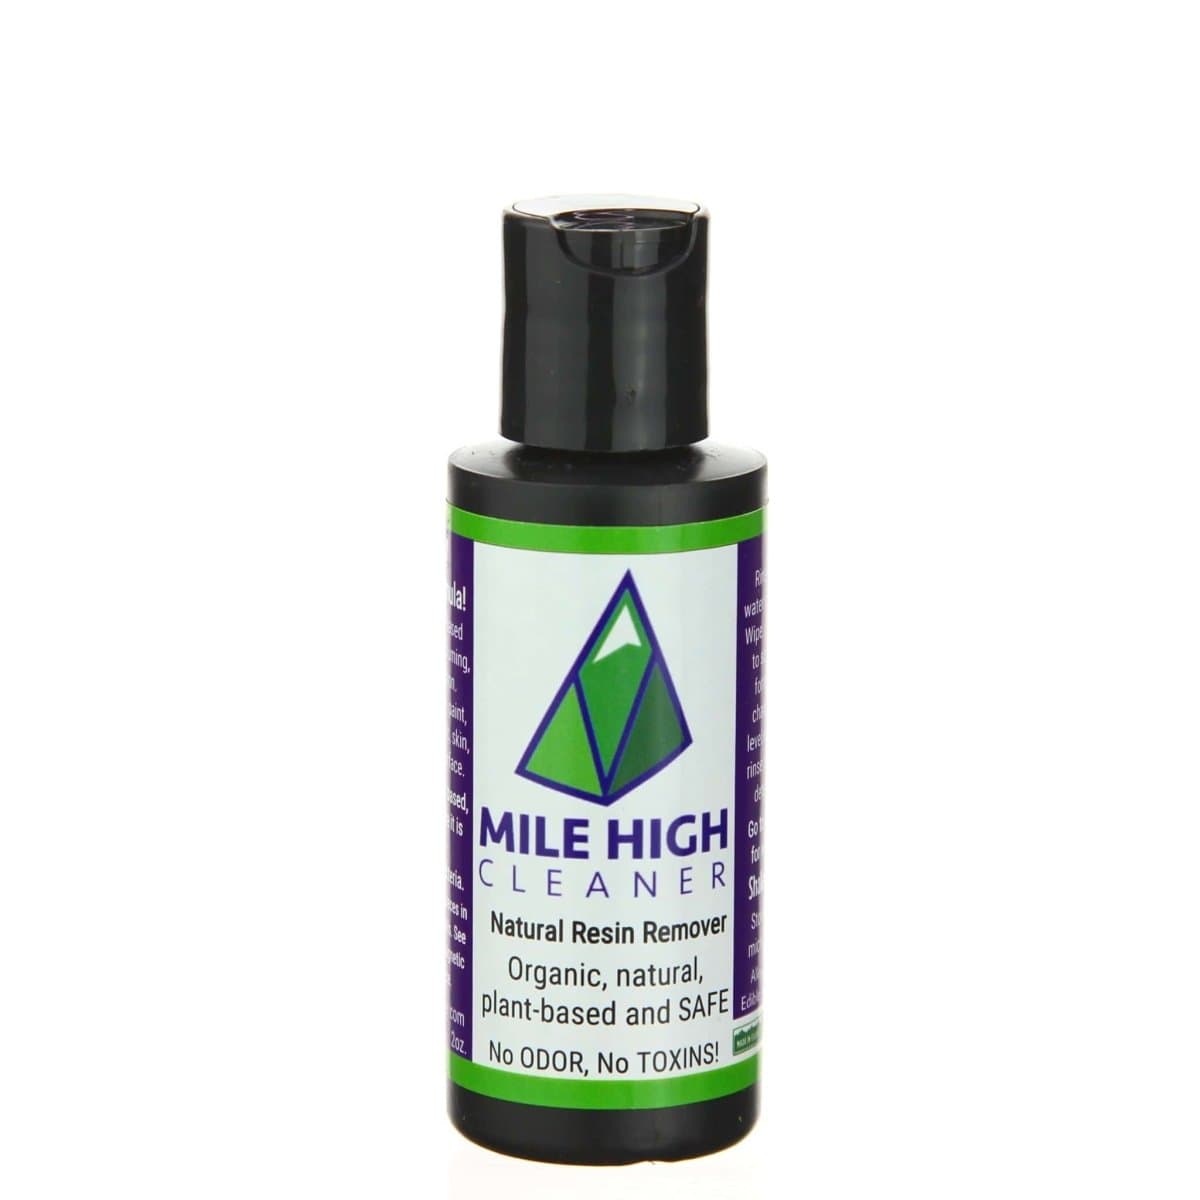 Mile High Cleaner Accessory Mile High Cleaner 2oz. Bottle